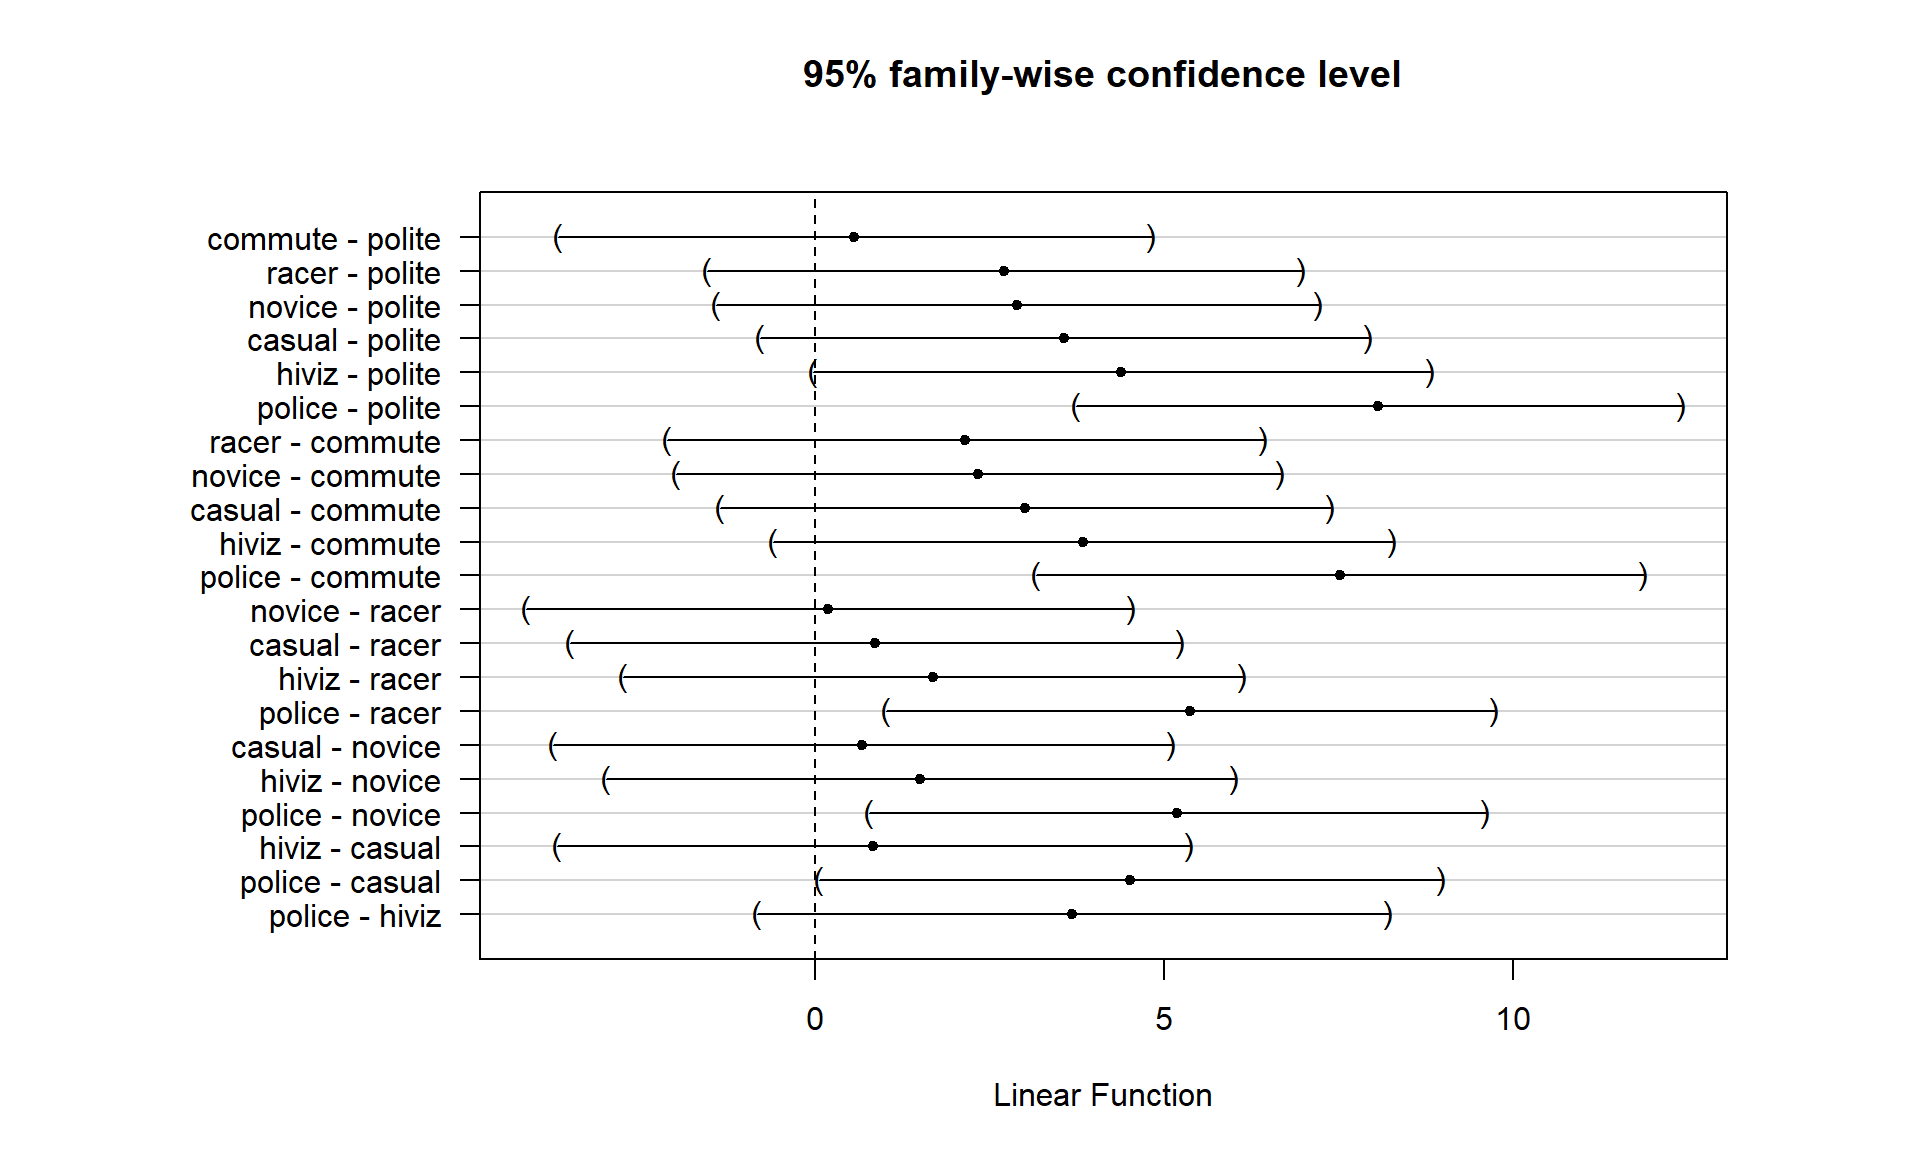 Tukey’s HSD confidence interval results at the 95% family-wise confidence level for the overtake distances linear model using the new Condition2 explanatory variable.